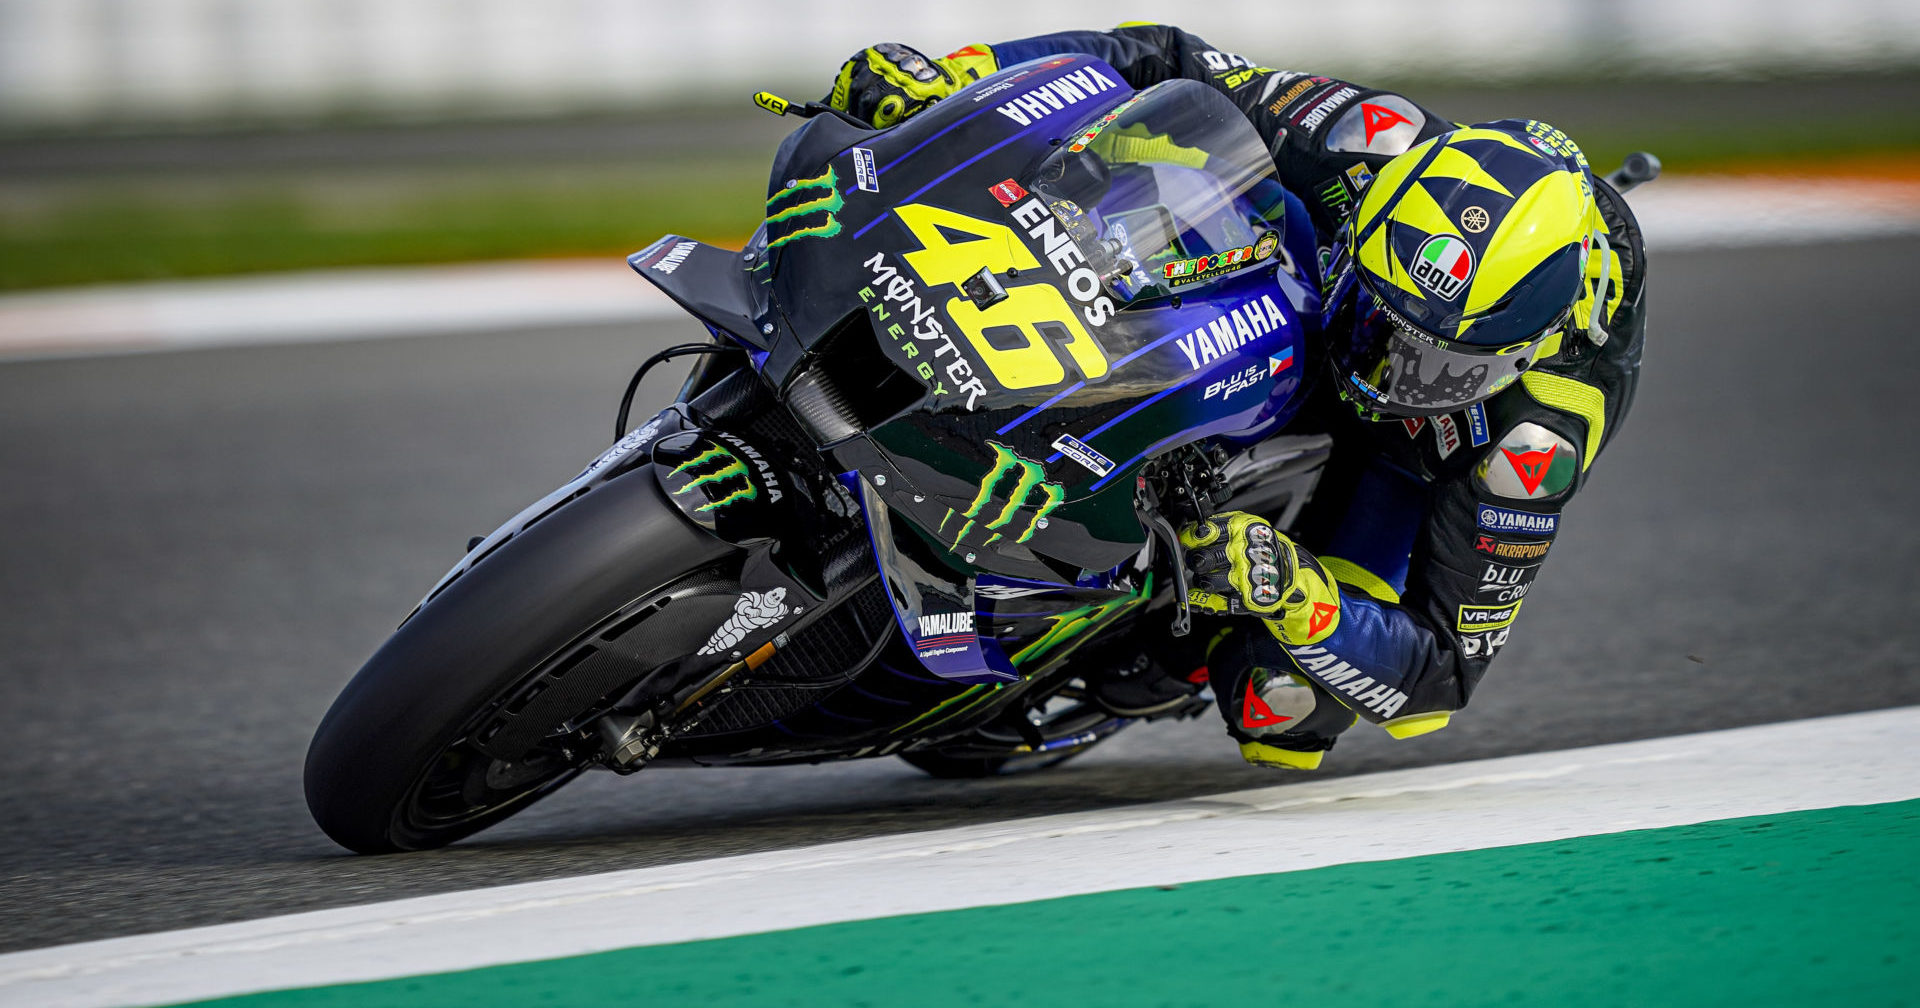 Valentino Rossi (46) at speed during the MotoGP race at Valencia #1. Photo courtesy Monster Energy Yamaha.